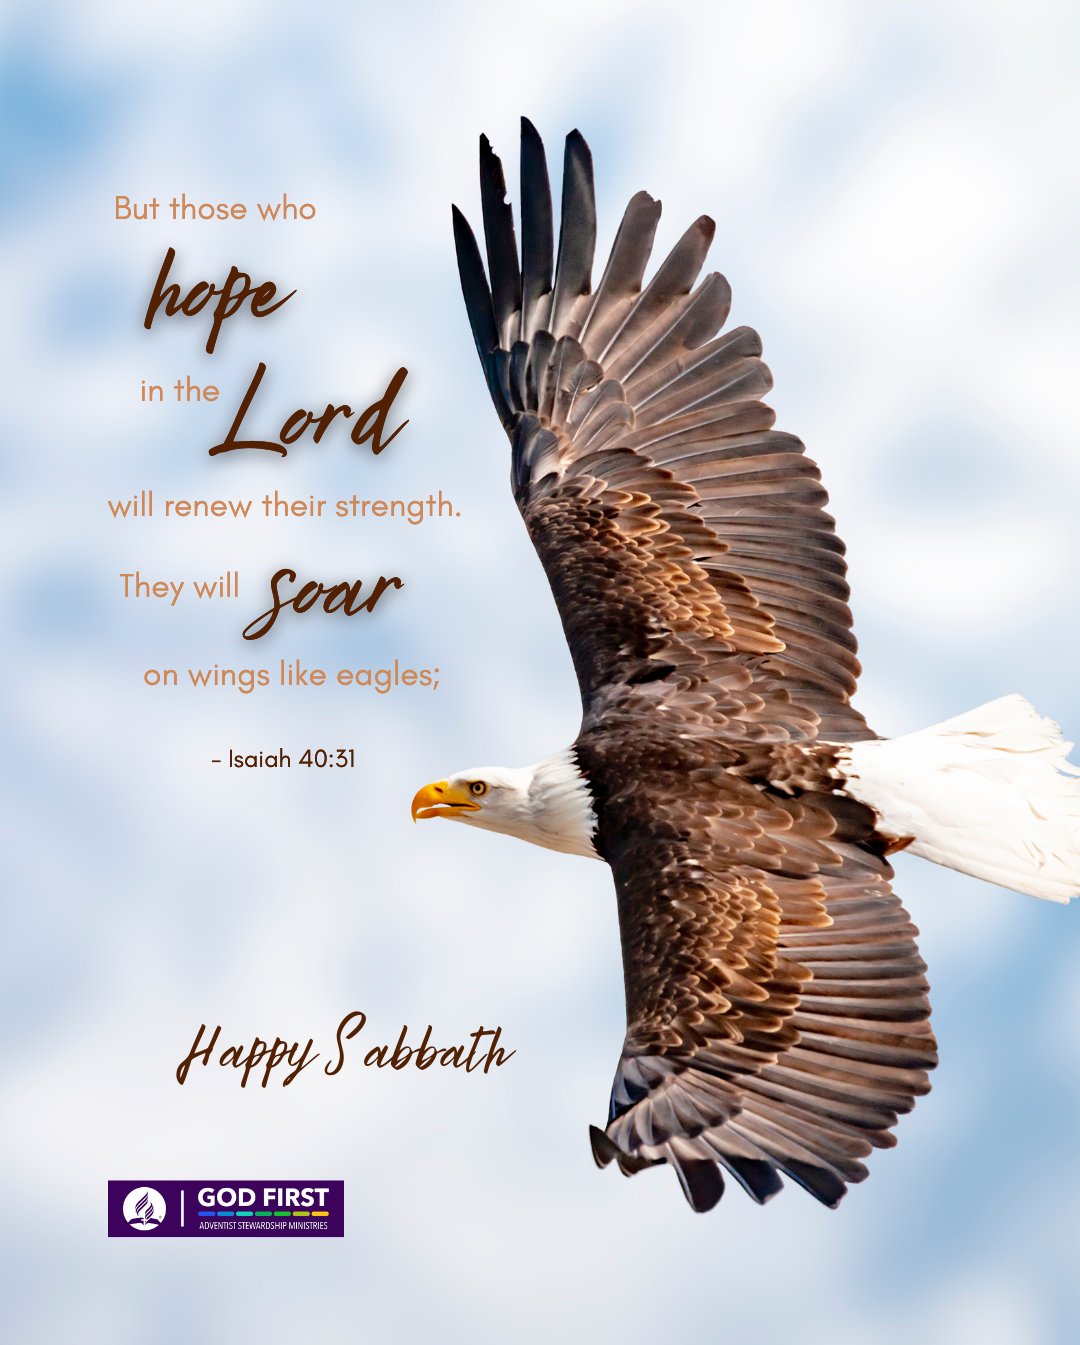 But those who in the Lord will renew their strength: They will Soar on wings like eagles; Isaiah 40.31 Happy S abbath GOD FIRST kbe